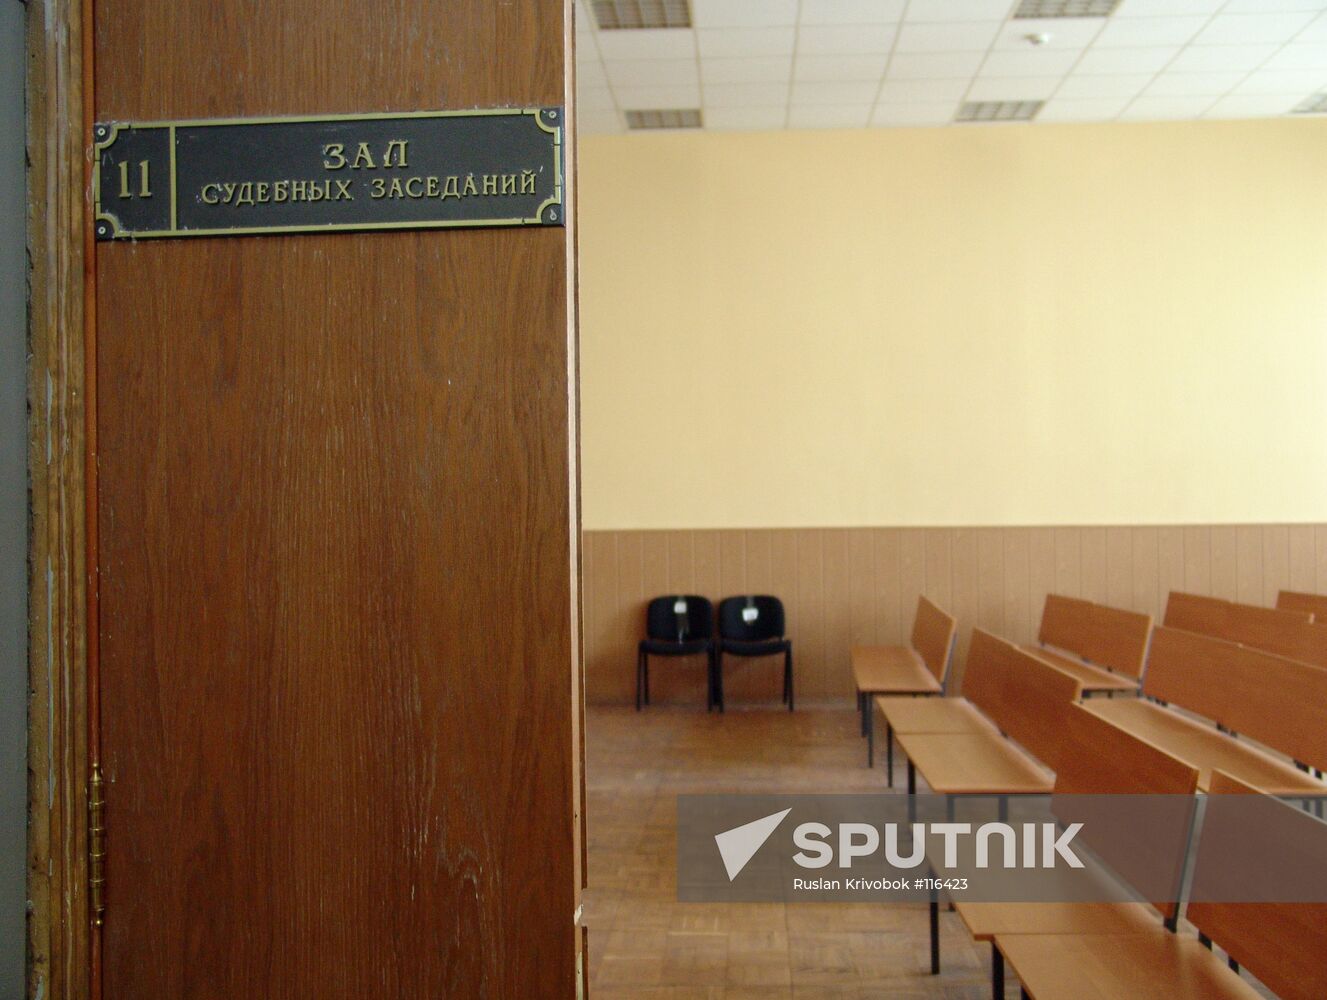 COURTROOM